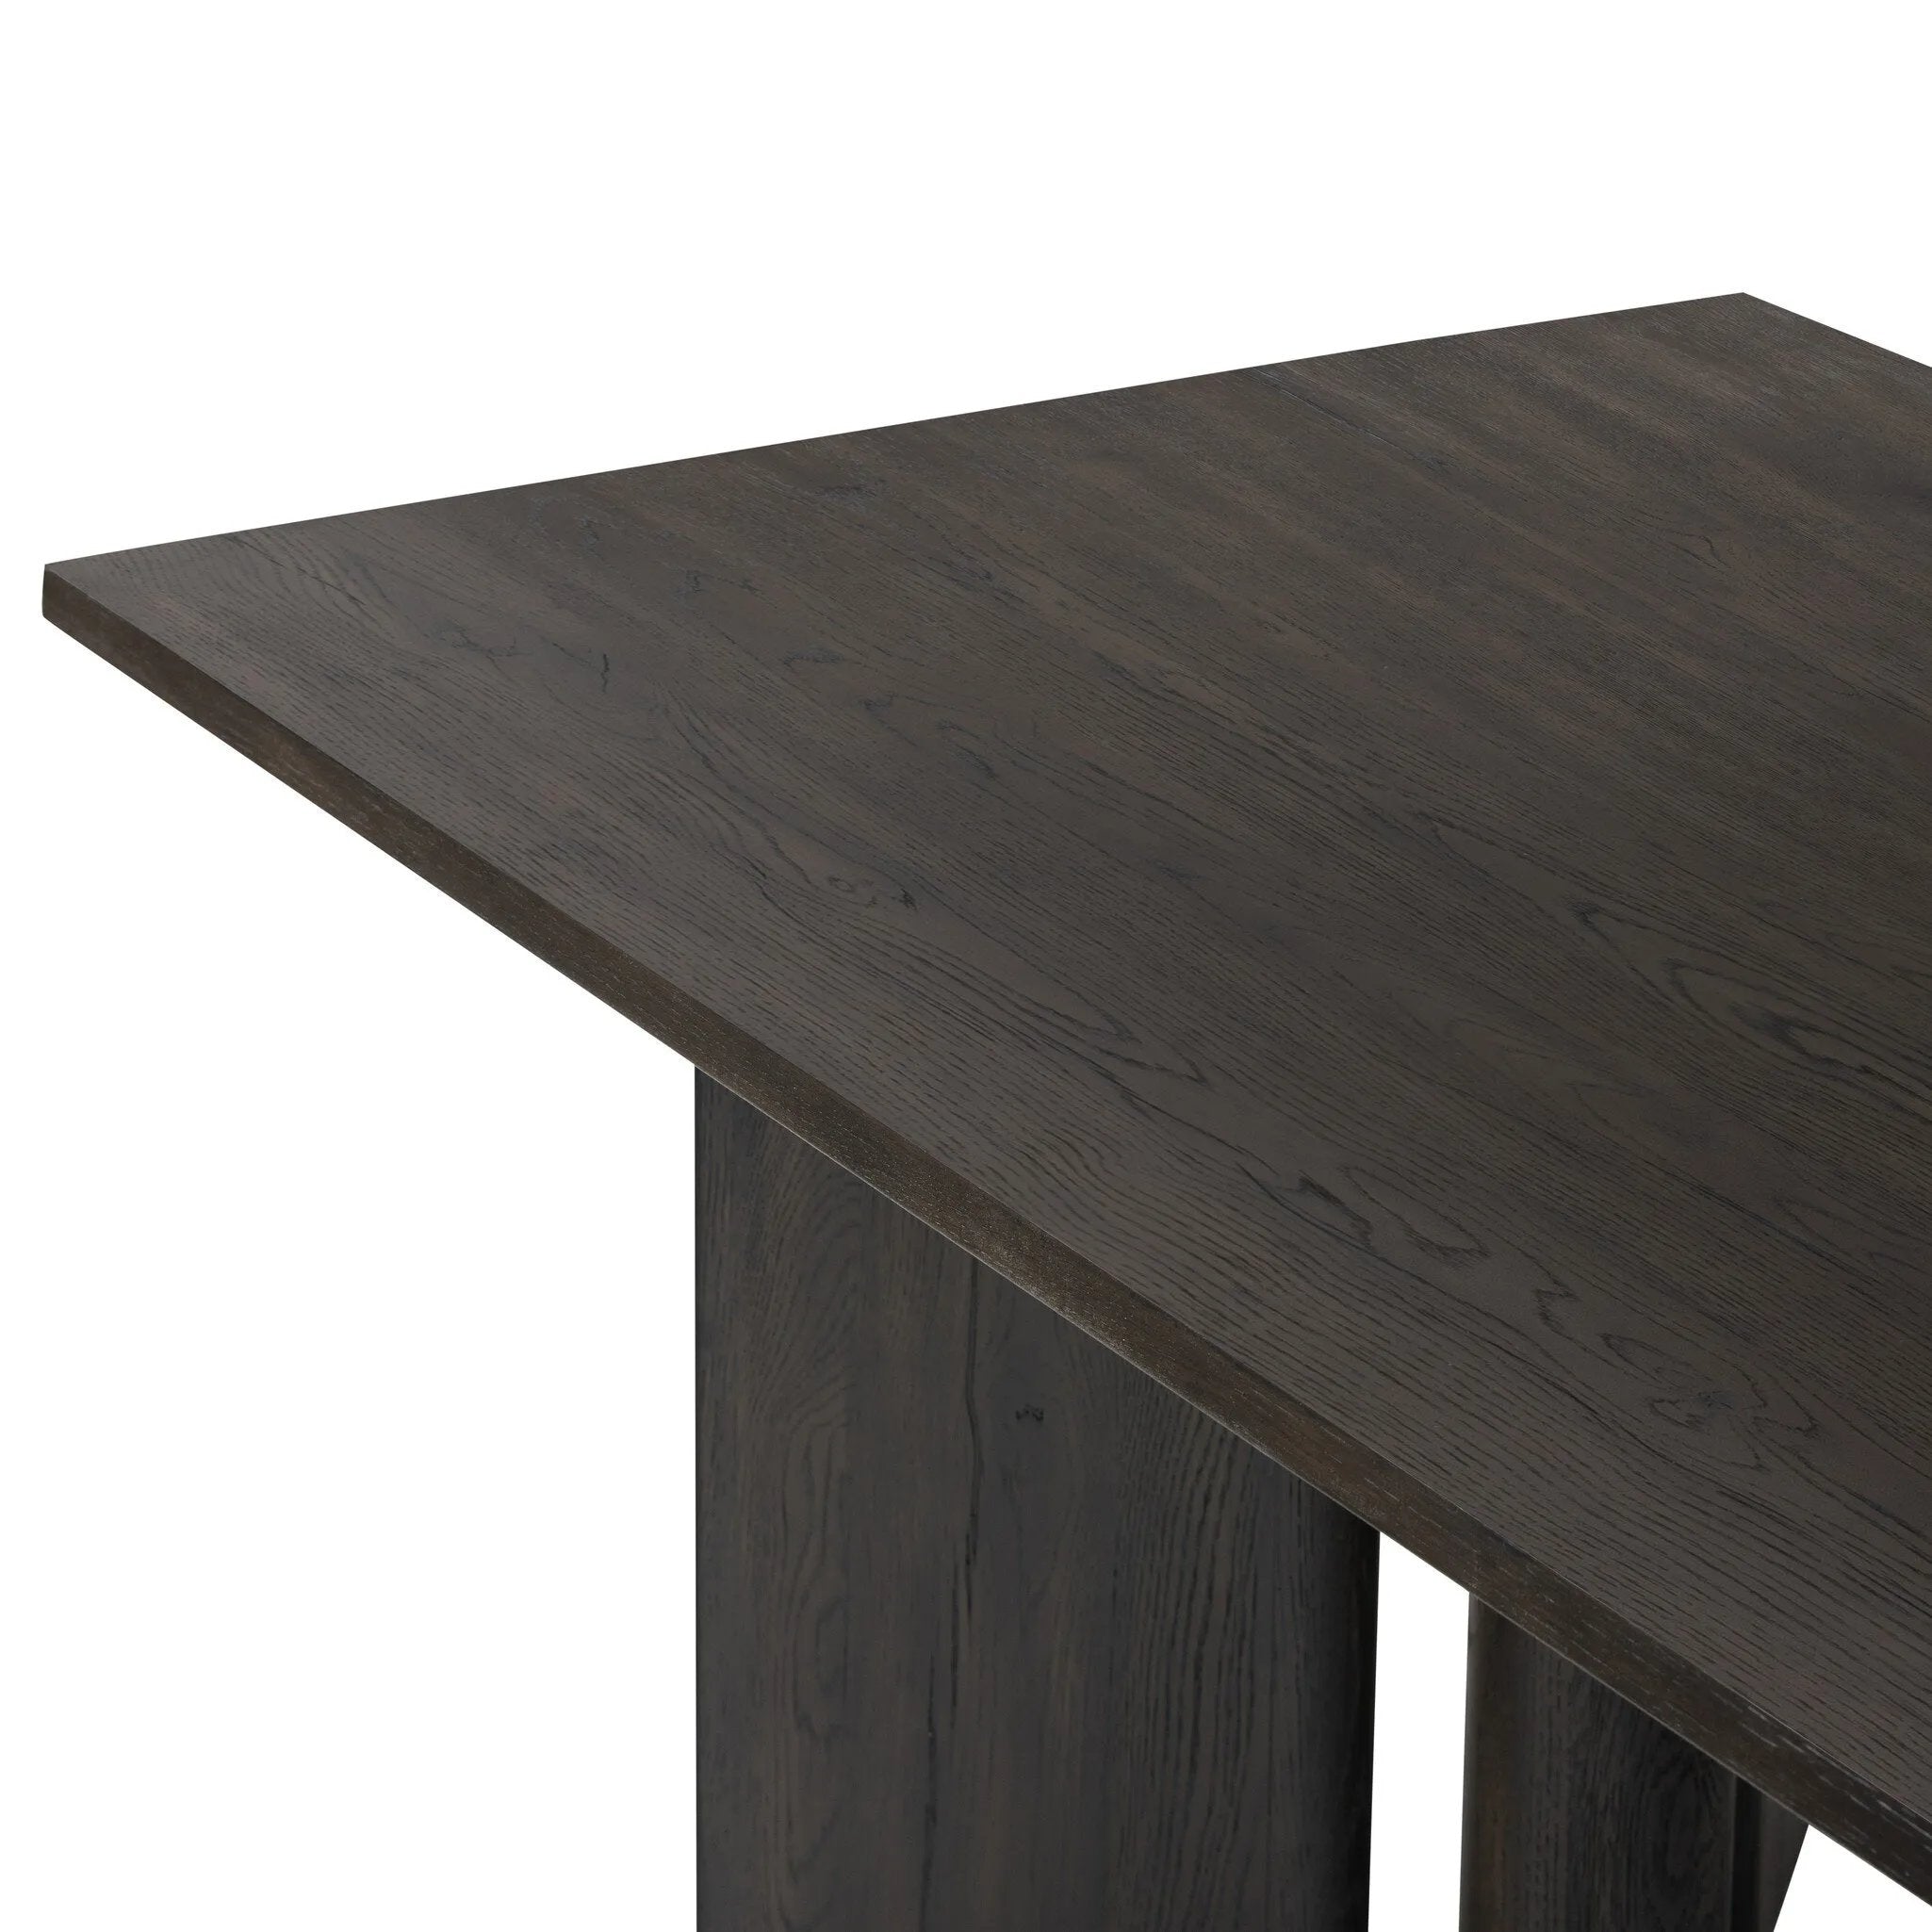 A smoked black finish brings character to this substantially sized dining table. Angled panel legs separated by a round cylinder craft a geometric look.Collection: Haide Amethyst Home provides interior design, new home construction design consulting, vintage area rugs, and lighting in the Miami metro area.